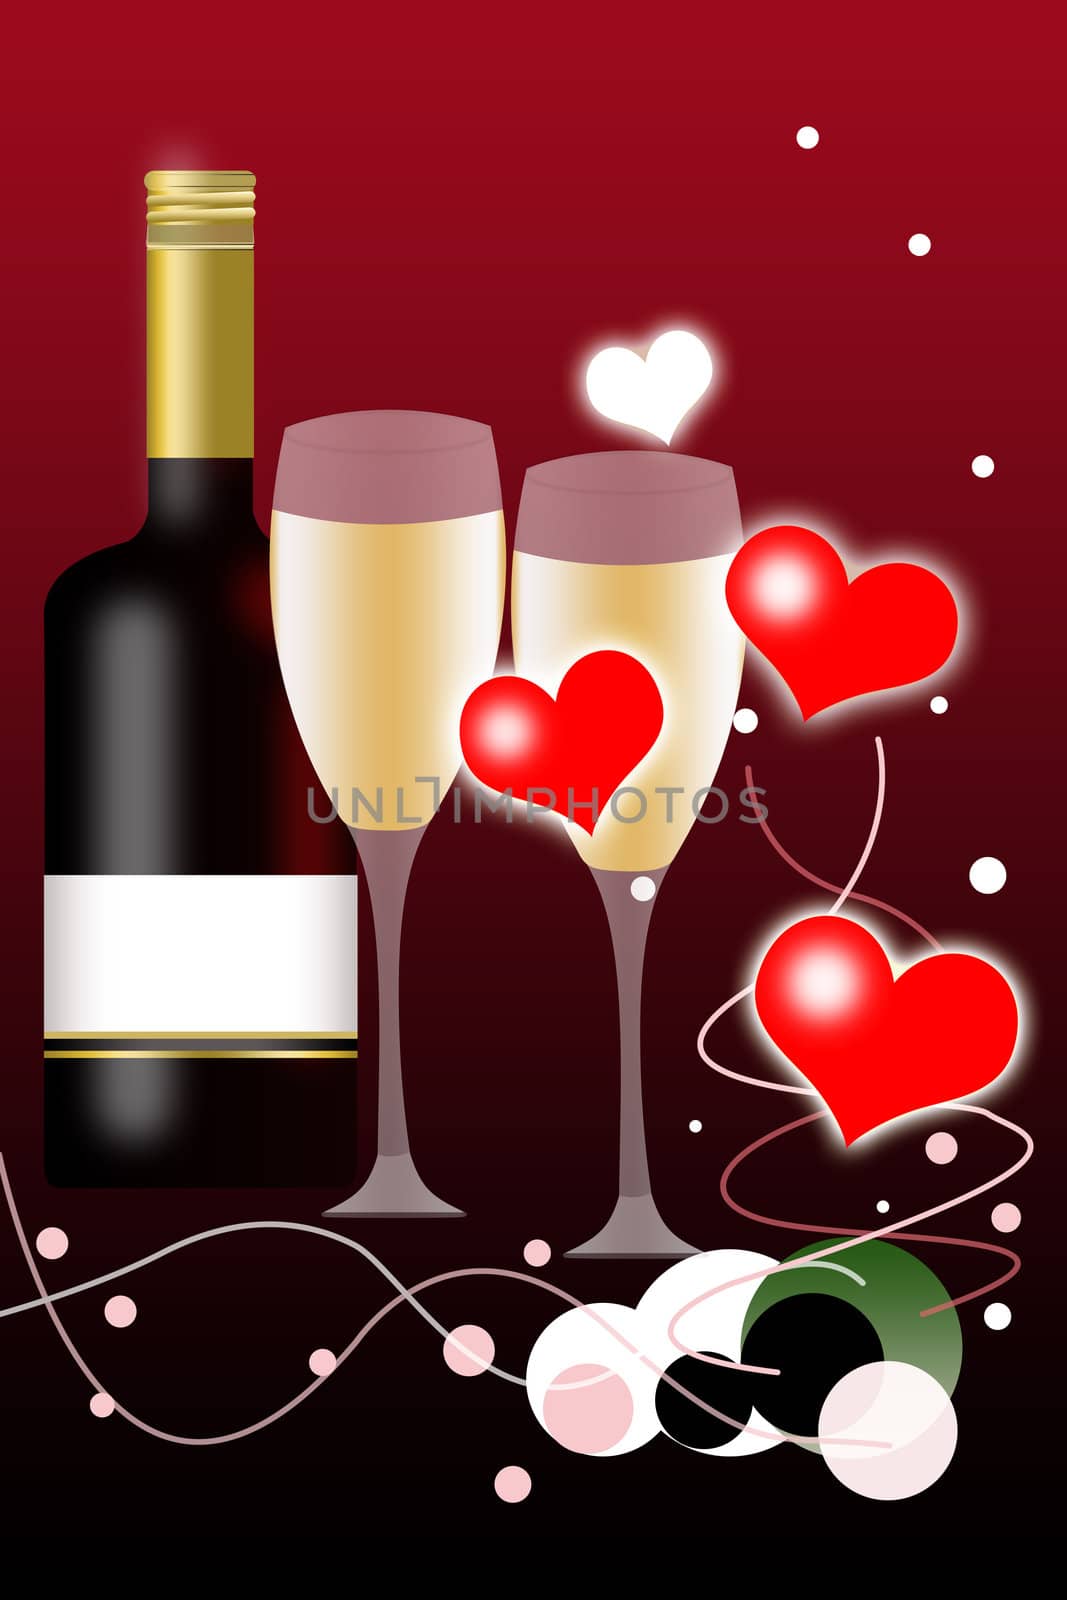 Valentines Day Background and Wine Bottle with Blank Label and two Glasses